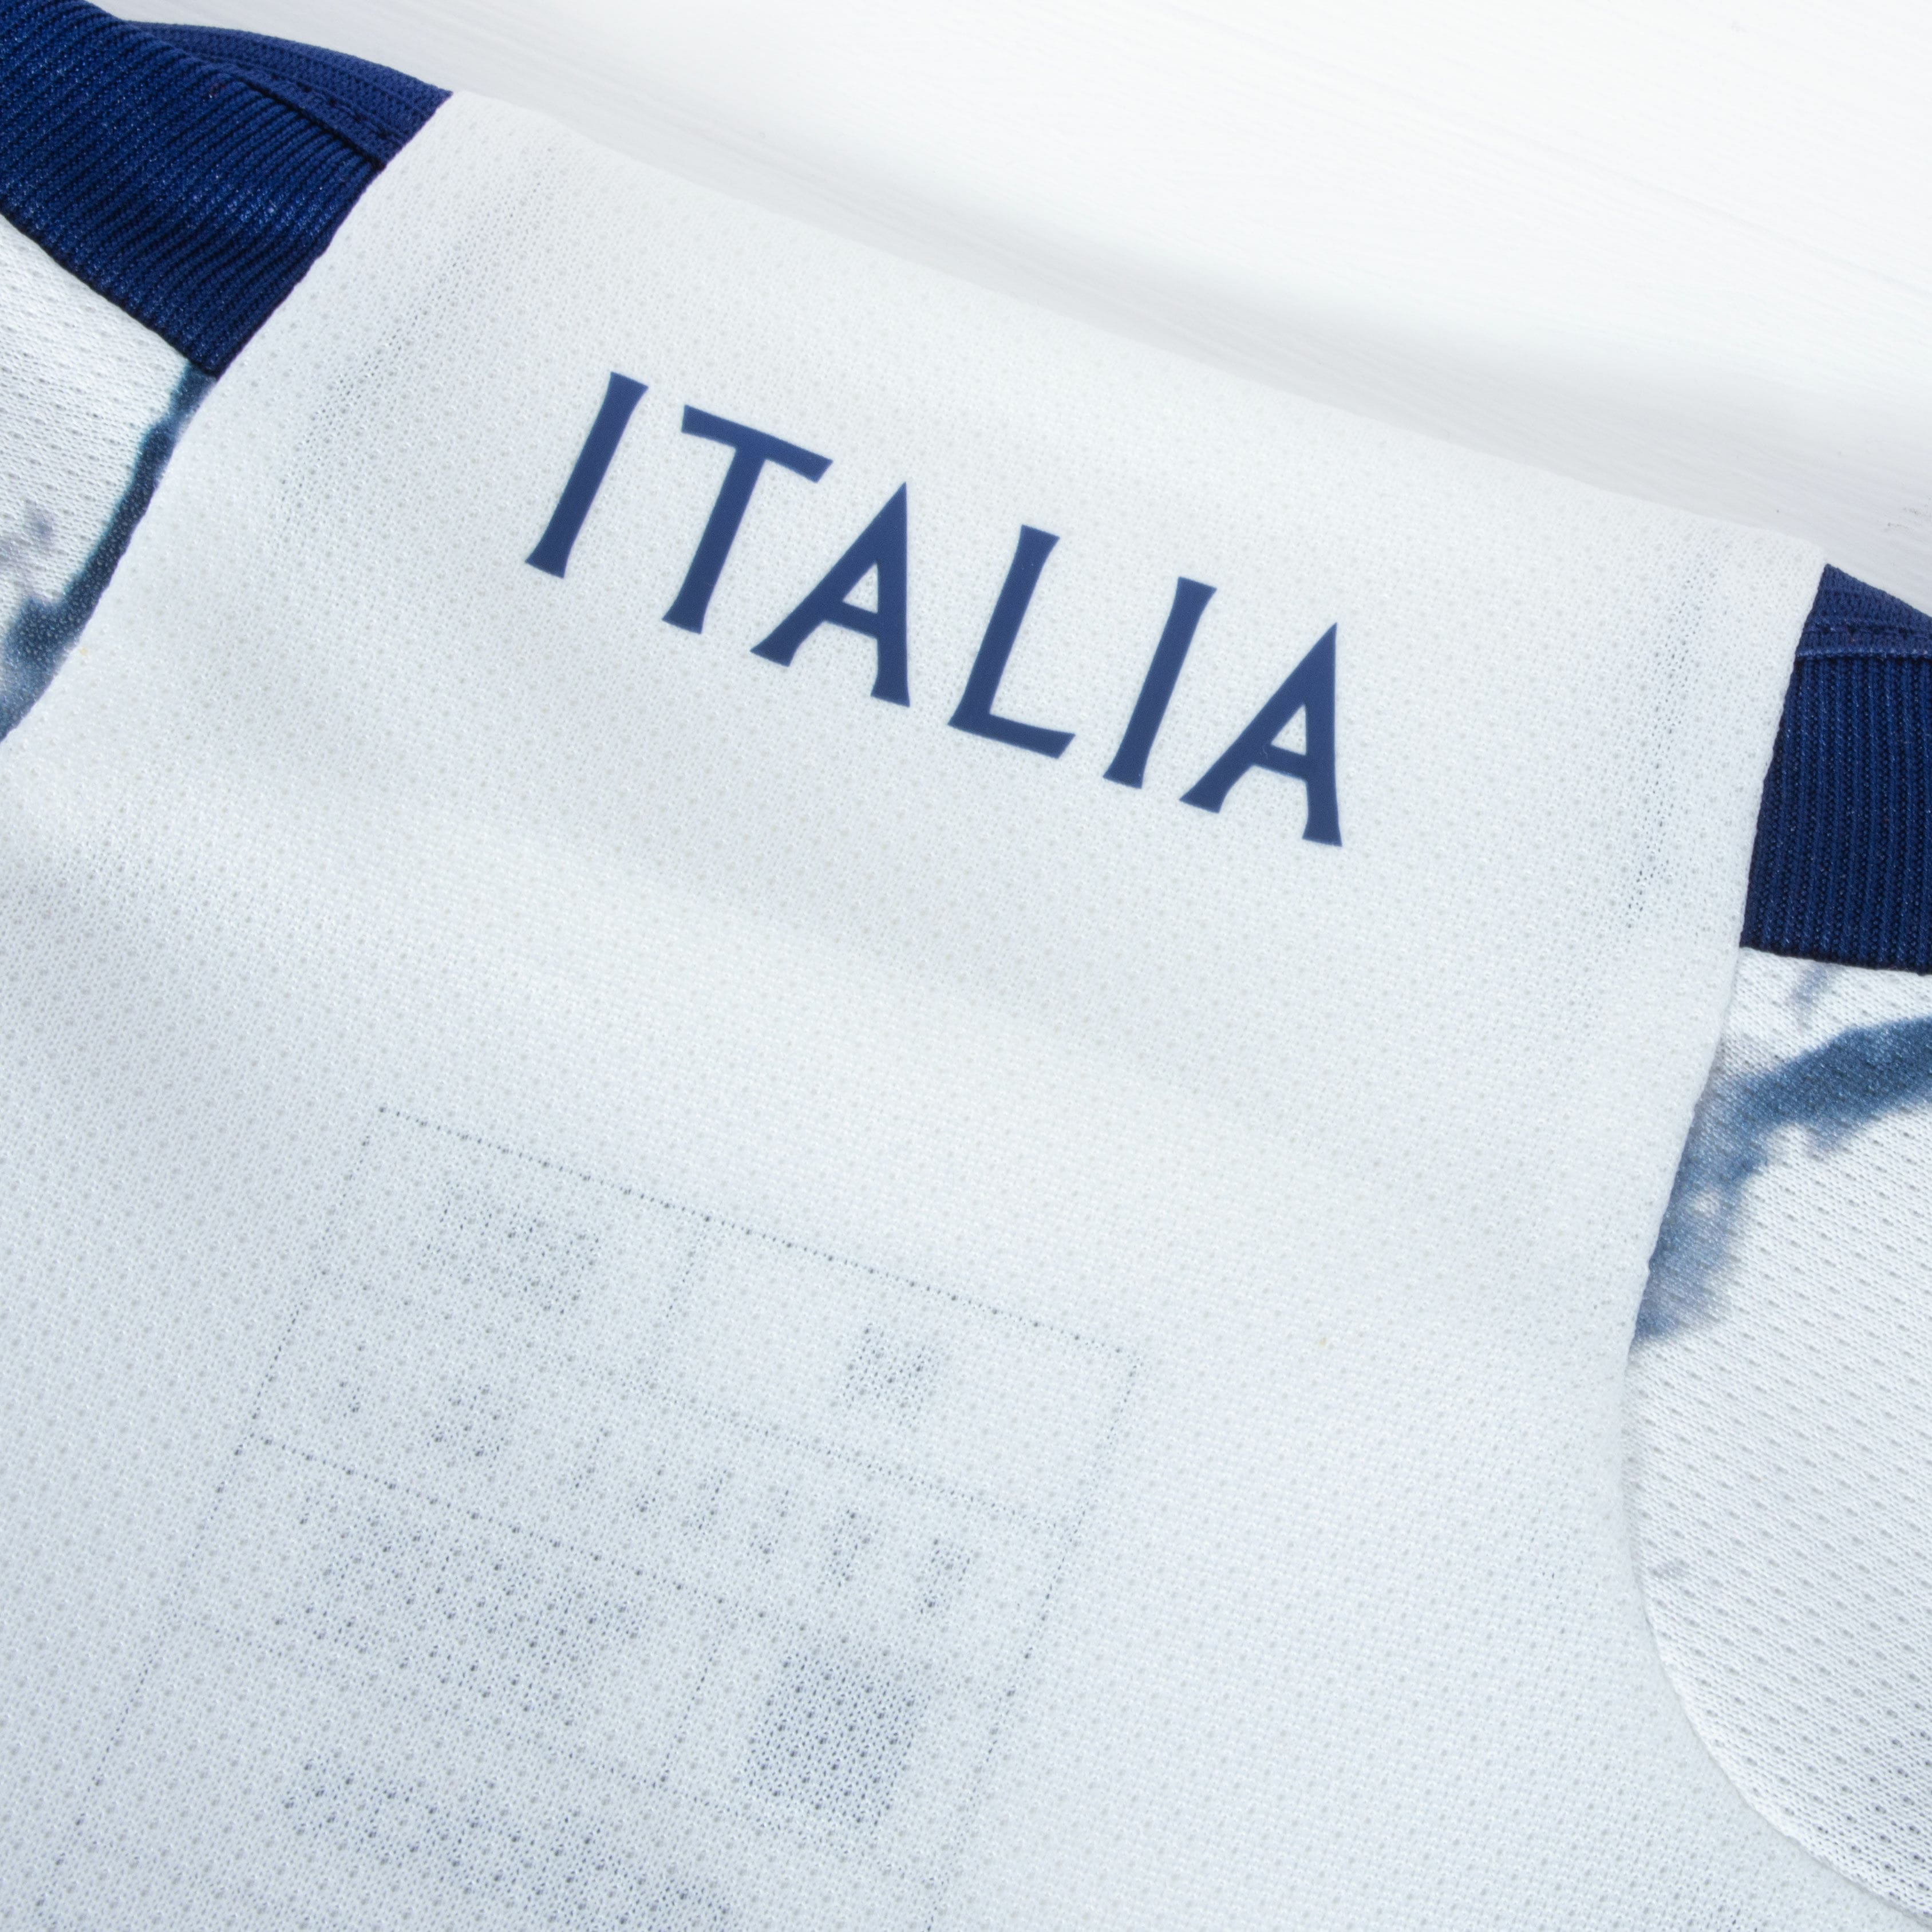 Italy Away 22/23 Nations League